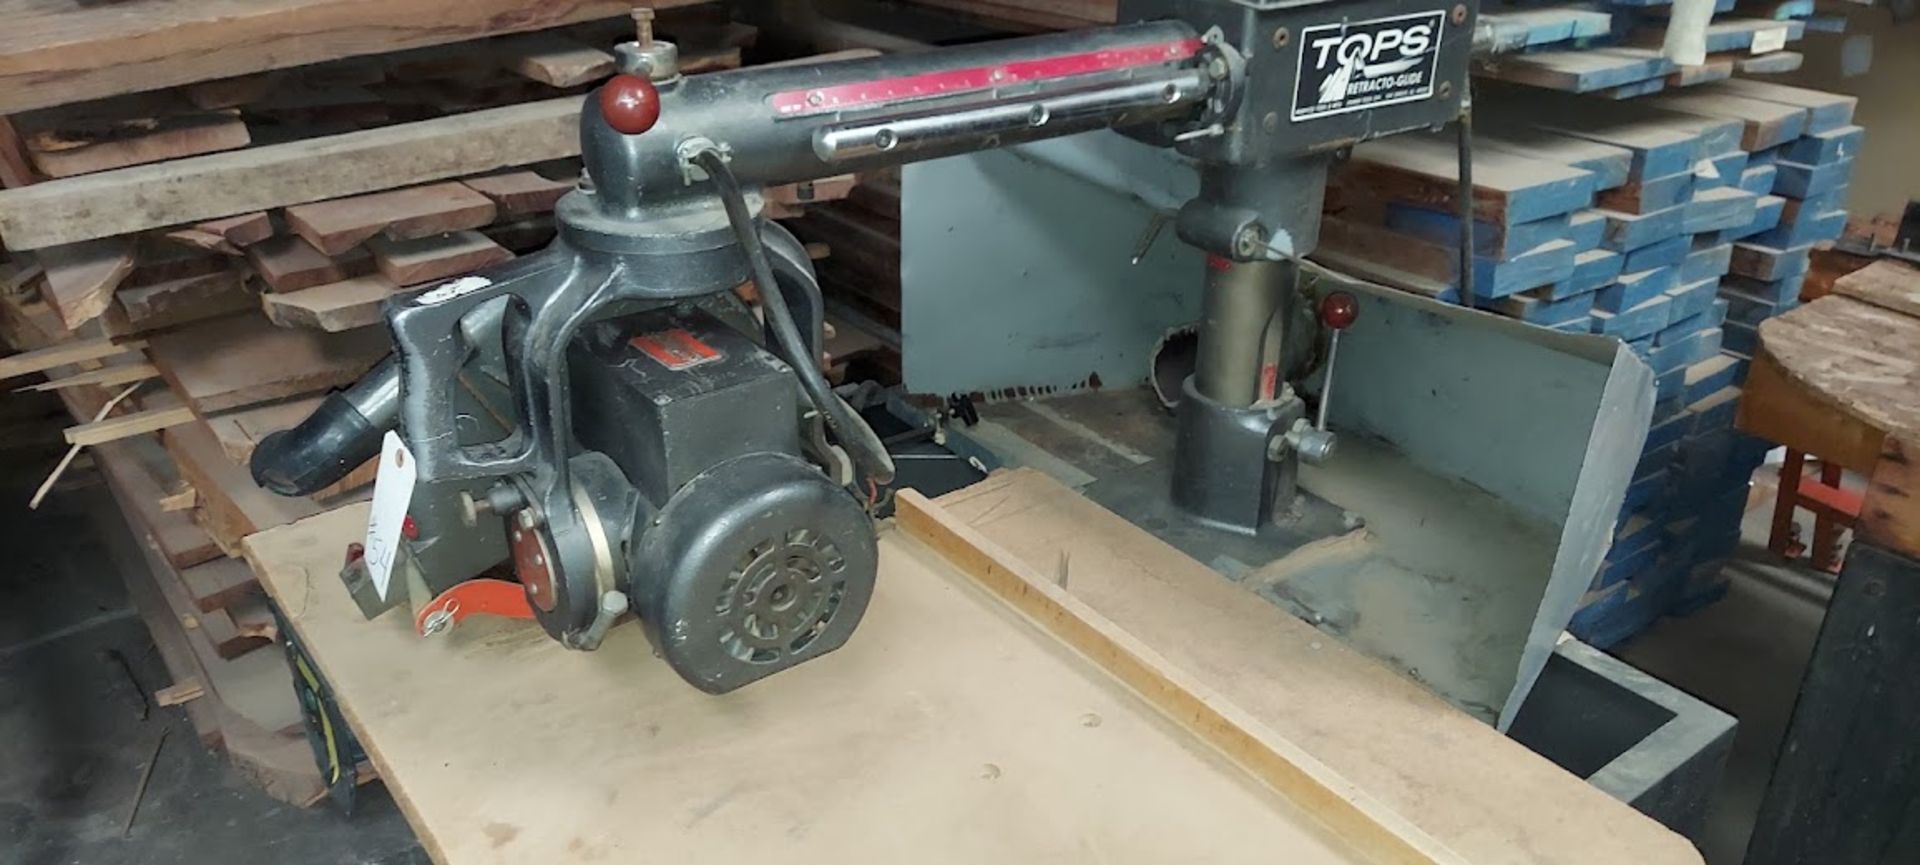 Tops 14" Radial Arm Saw, Model 55508M, 3hp 3ph - Image 3 of 4